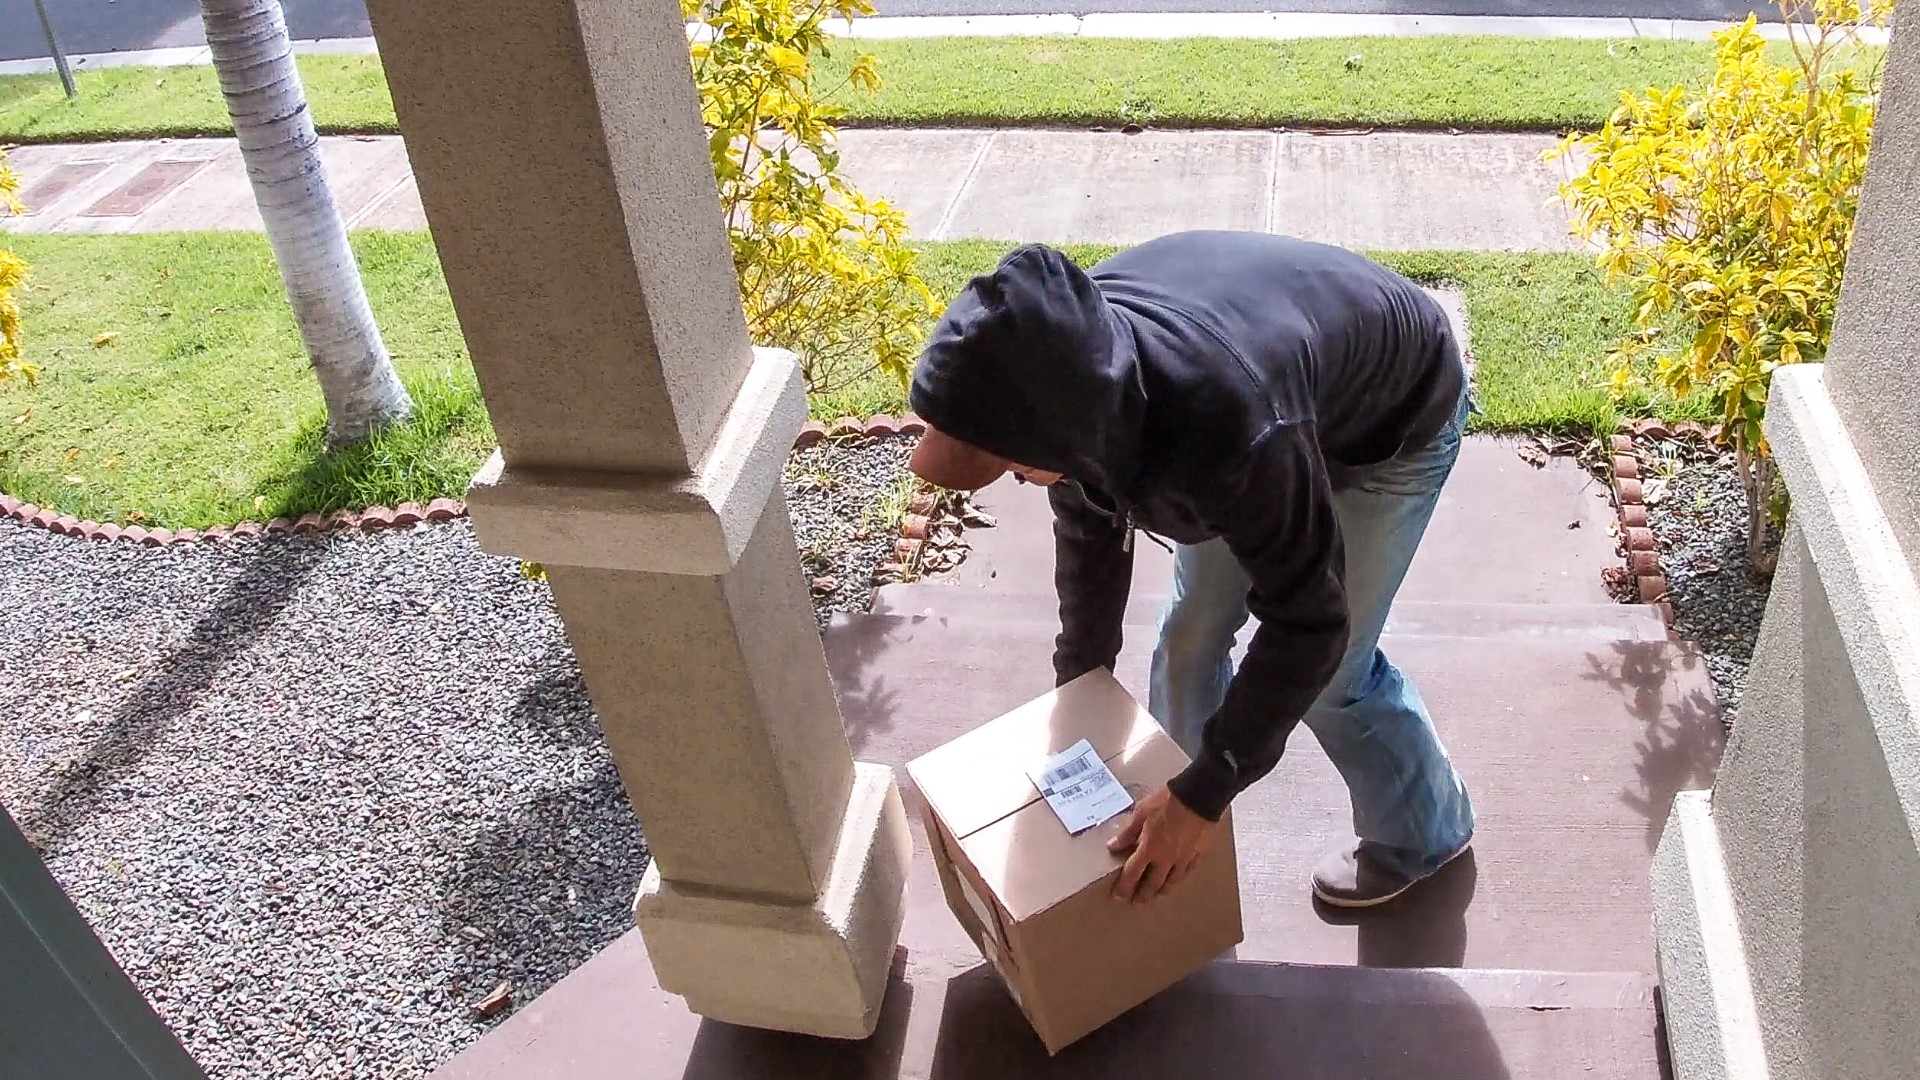 Porch pirates are prevalent in St. Louis, according to a new study. Here's what to do if your packages are stolen.